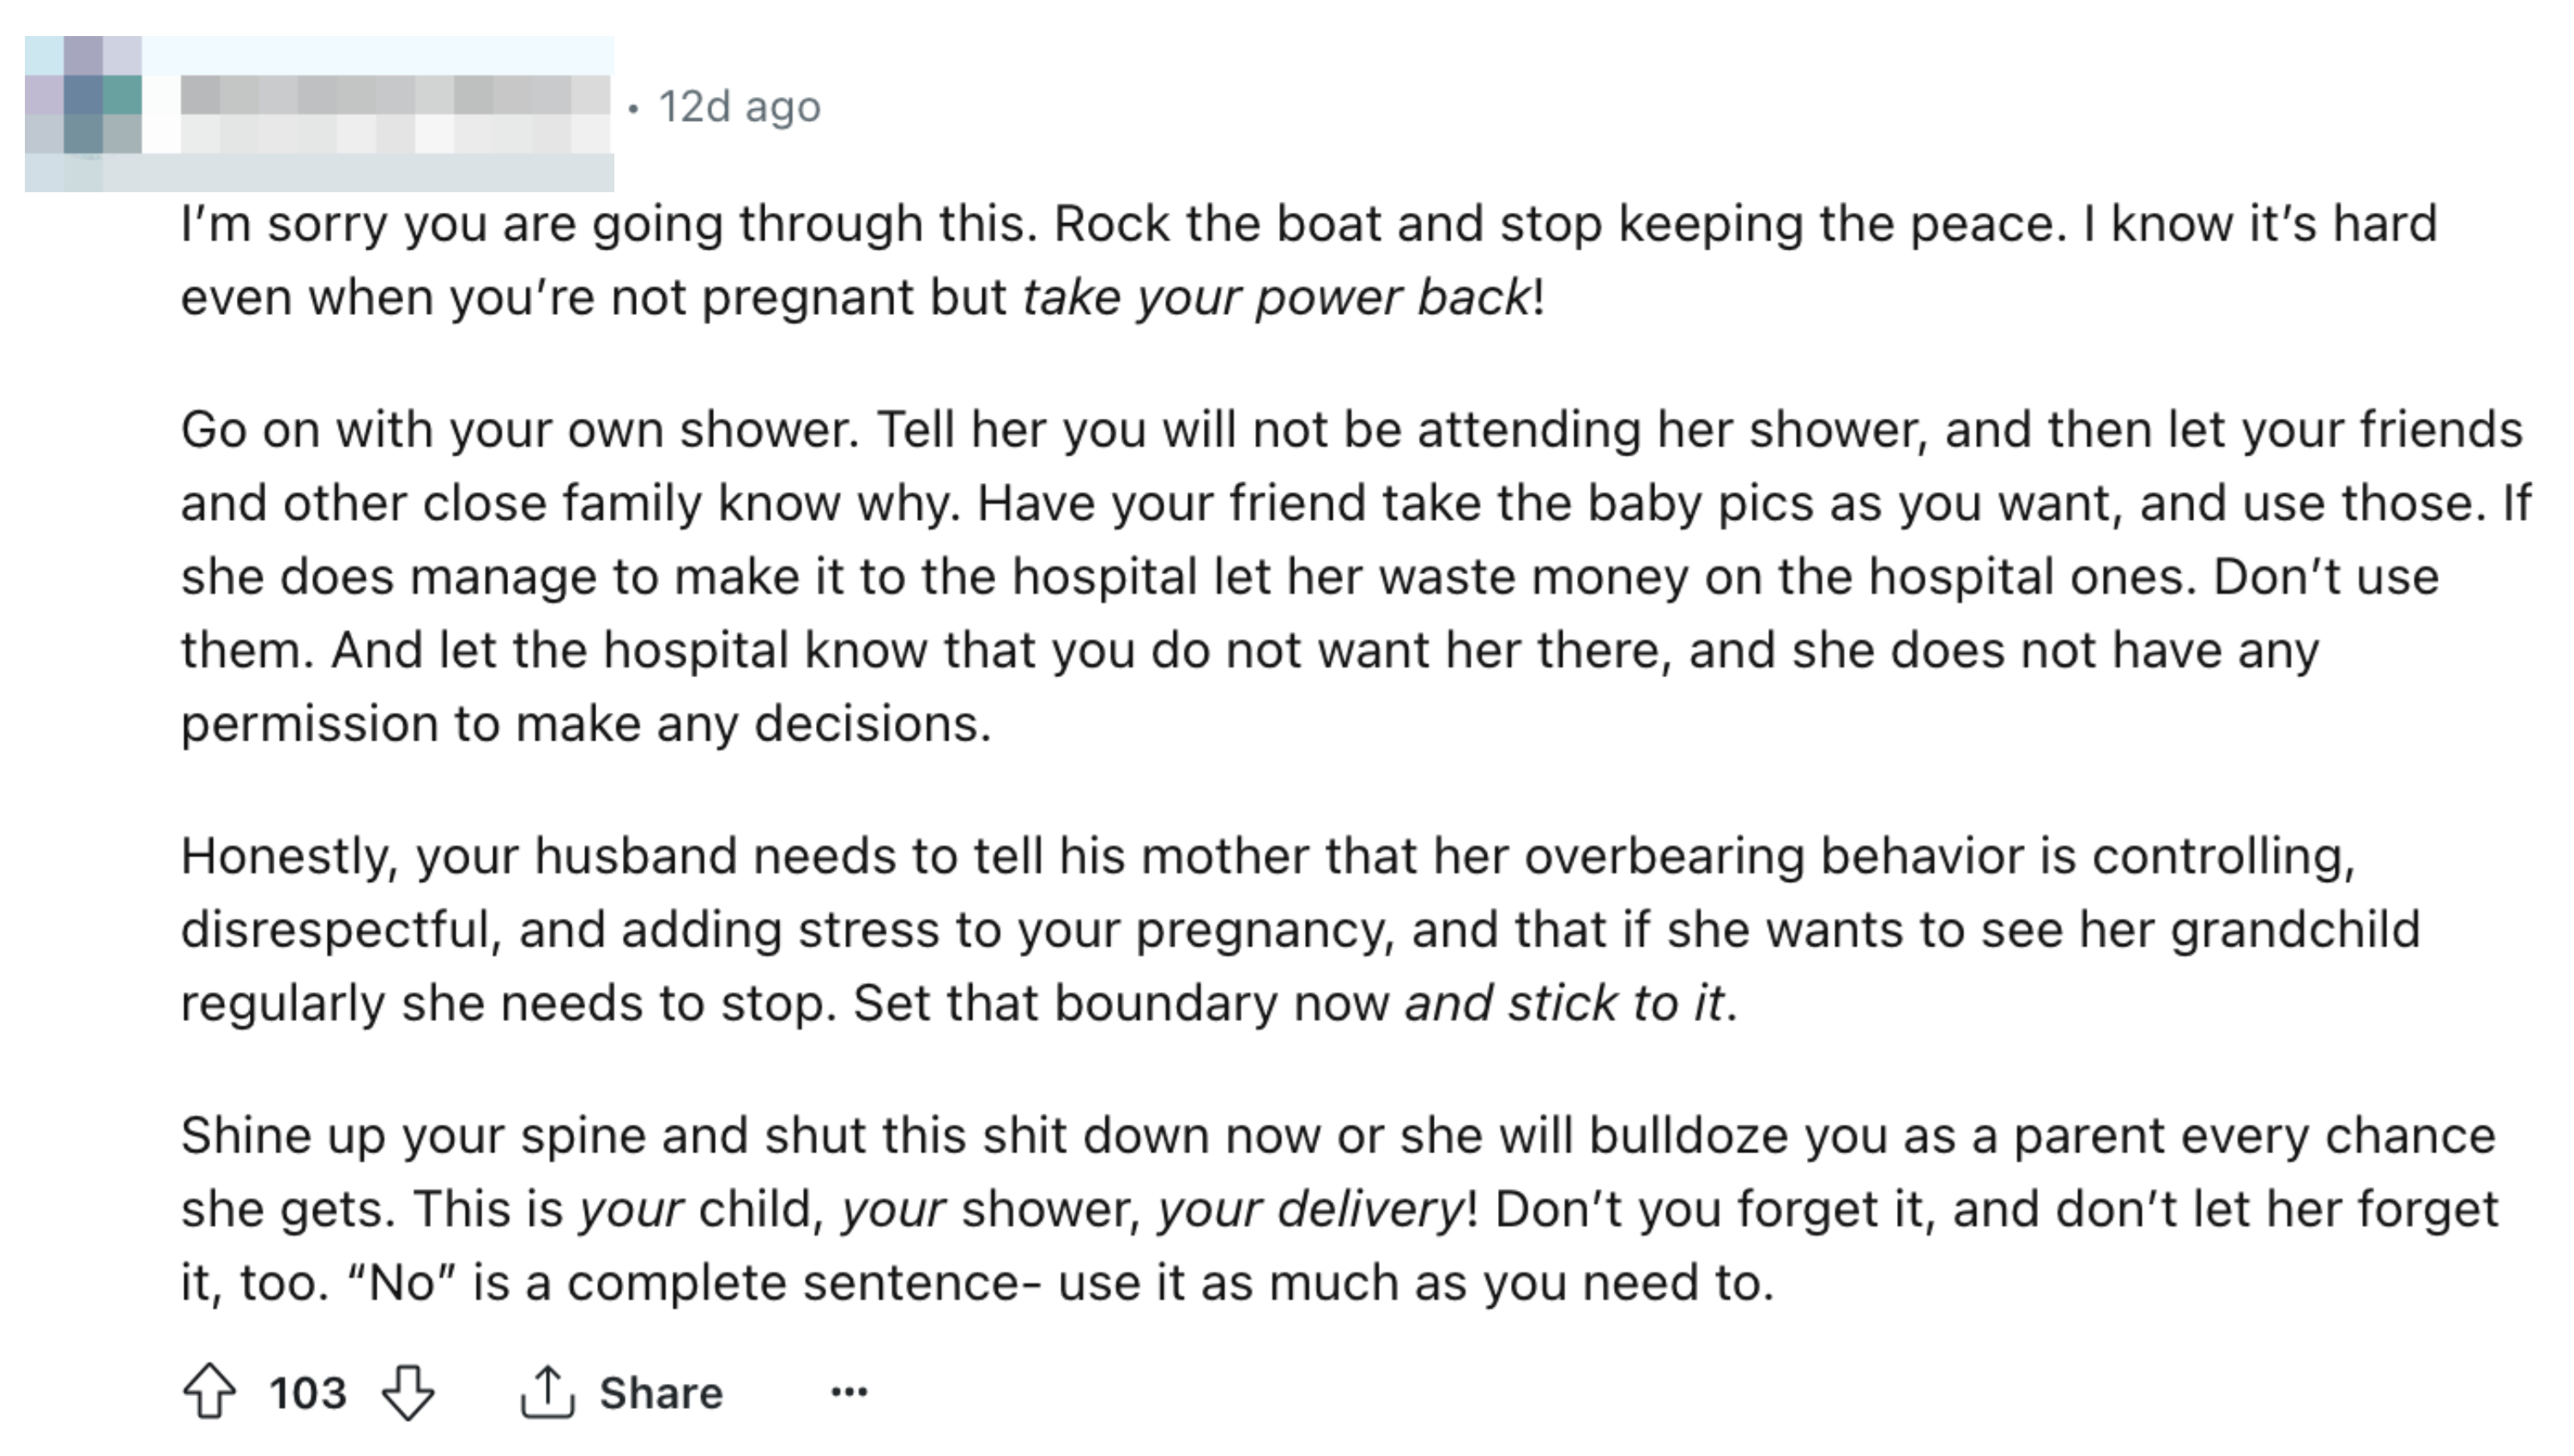 The image displays a forum post discussing relationship boundaries during childbirth, with advice on handling unsupportive family